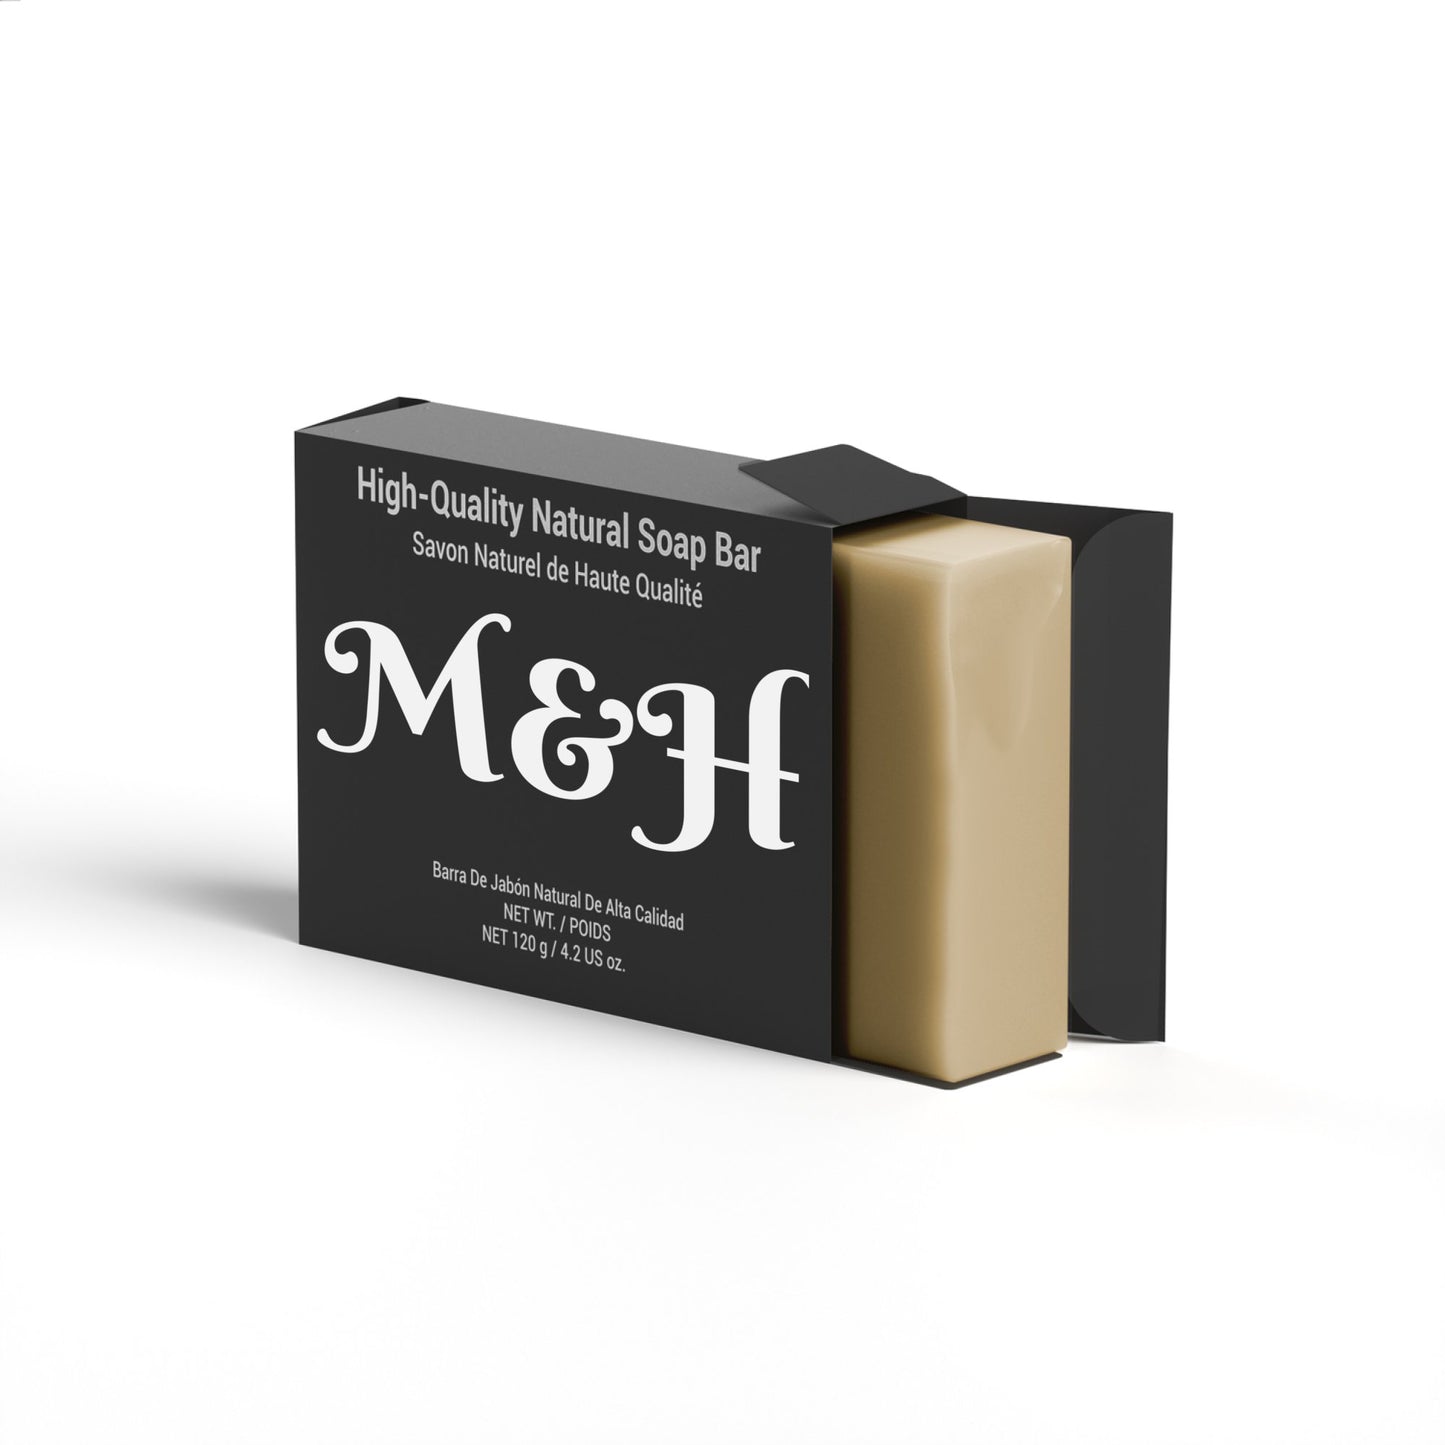 Apricot Soap Bars - M&H FashionApricot Soap Barssoap-apricotM&H FashionM&H Fashionsoap-apricotApricot SoapApricot Soap BarsM&H Fashionsoap-apricotM&H Fashion Introducing our premium Natural Soap Bar, meticulously crafted with high-quality plant oils designed to nourish and soften the skin. It incorporates fresh goat's miApricot Soap Bars